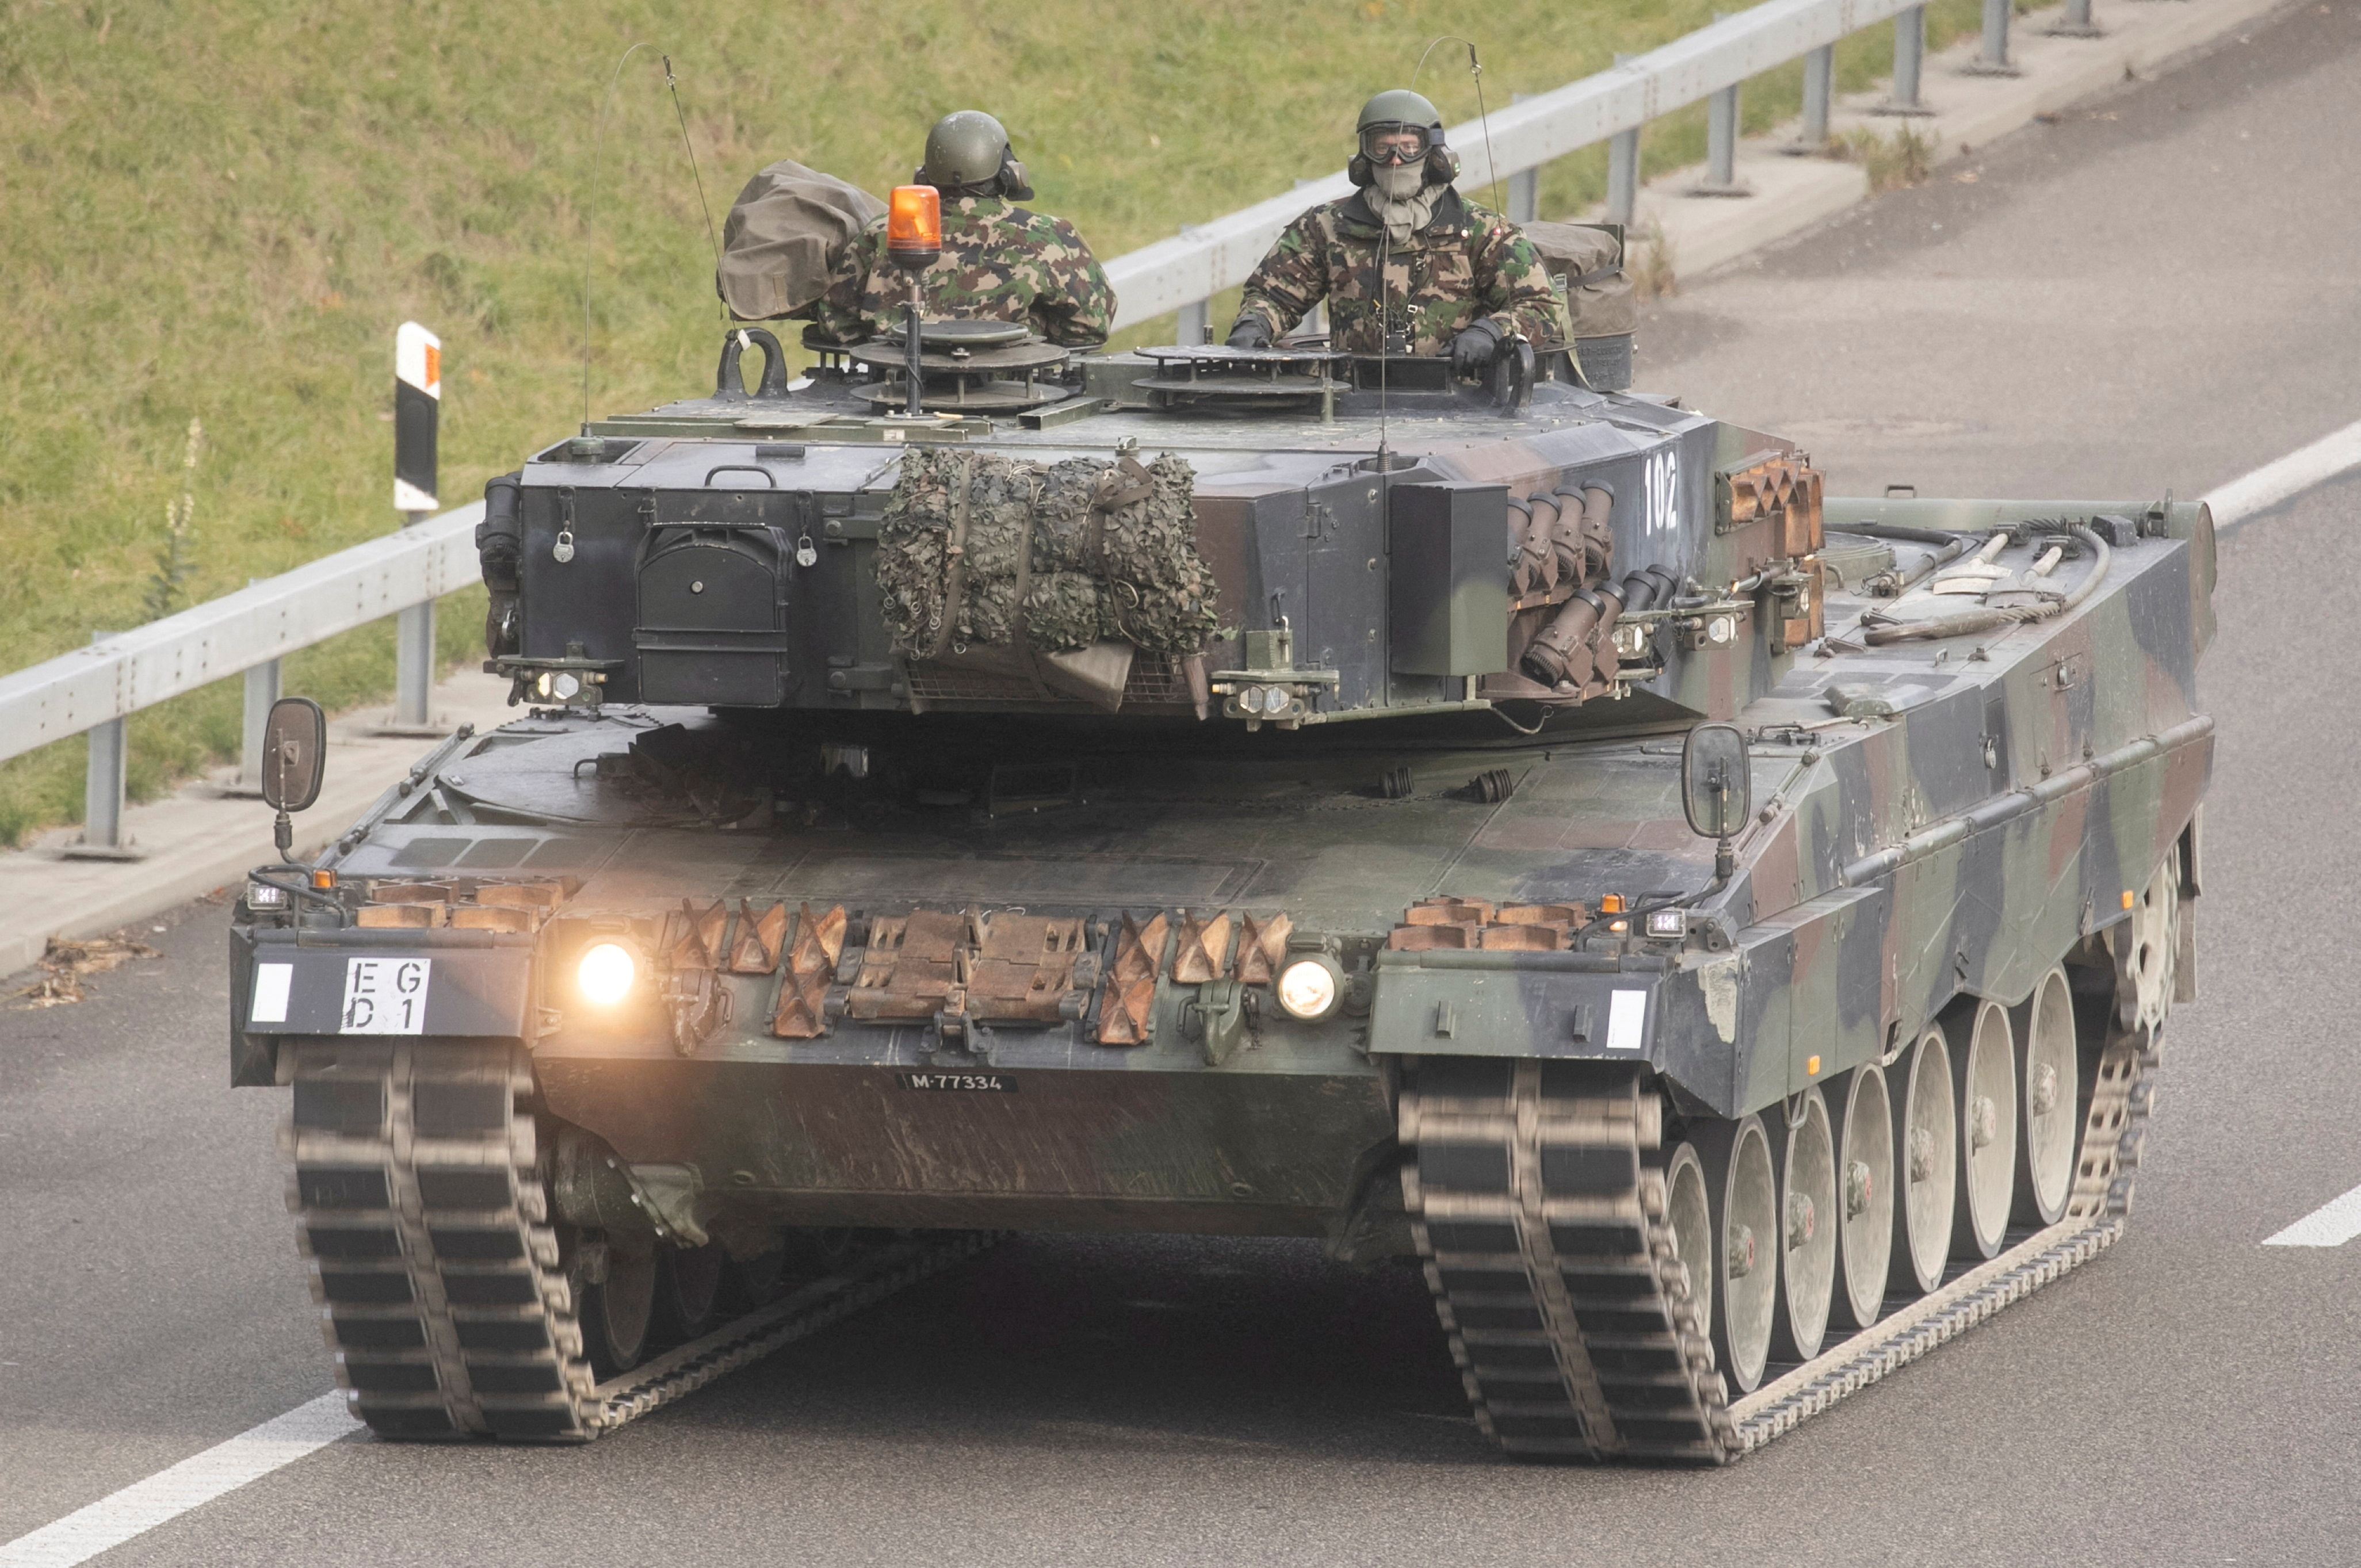 Vehicles of the Swiss Army take part in the military exercise "Pilum" near Othmarsingen